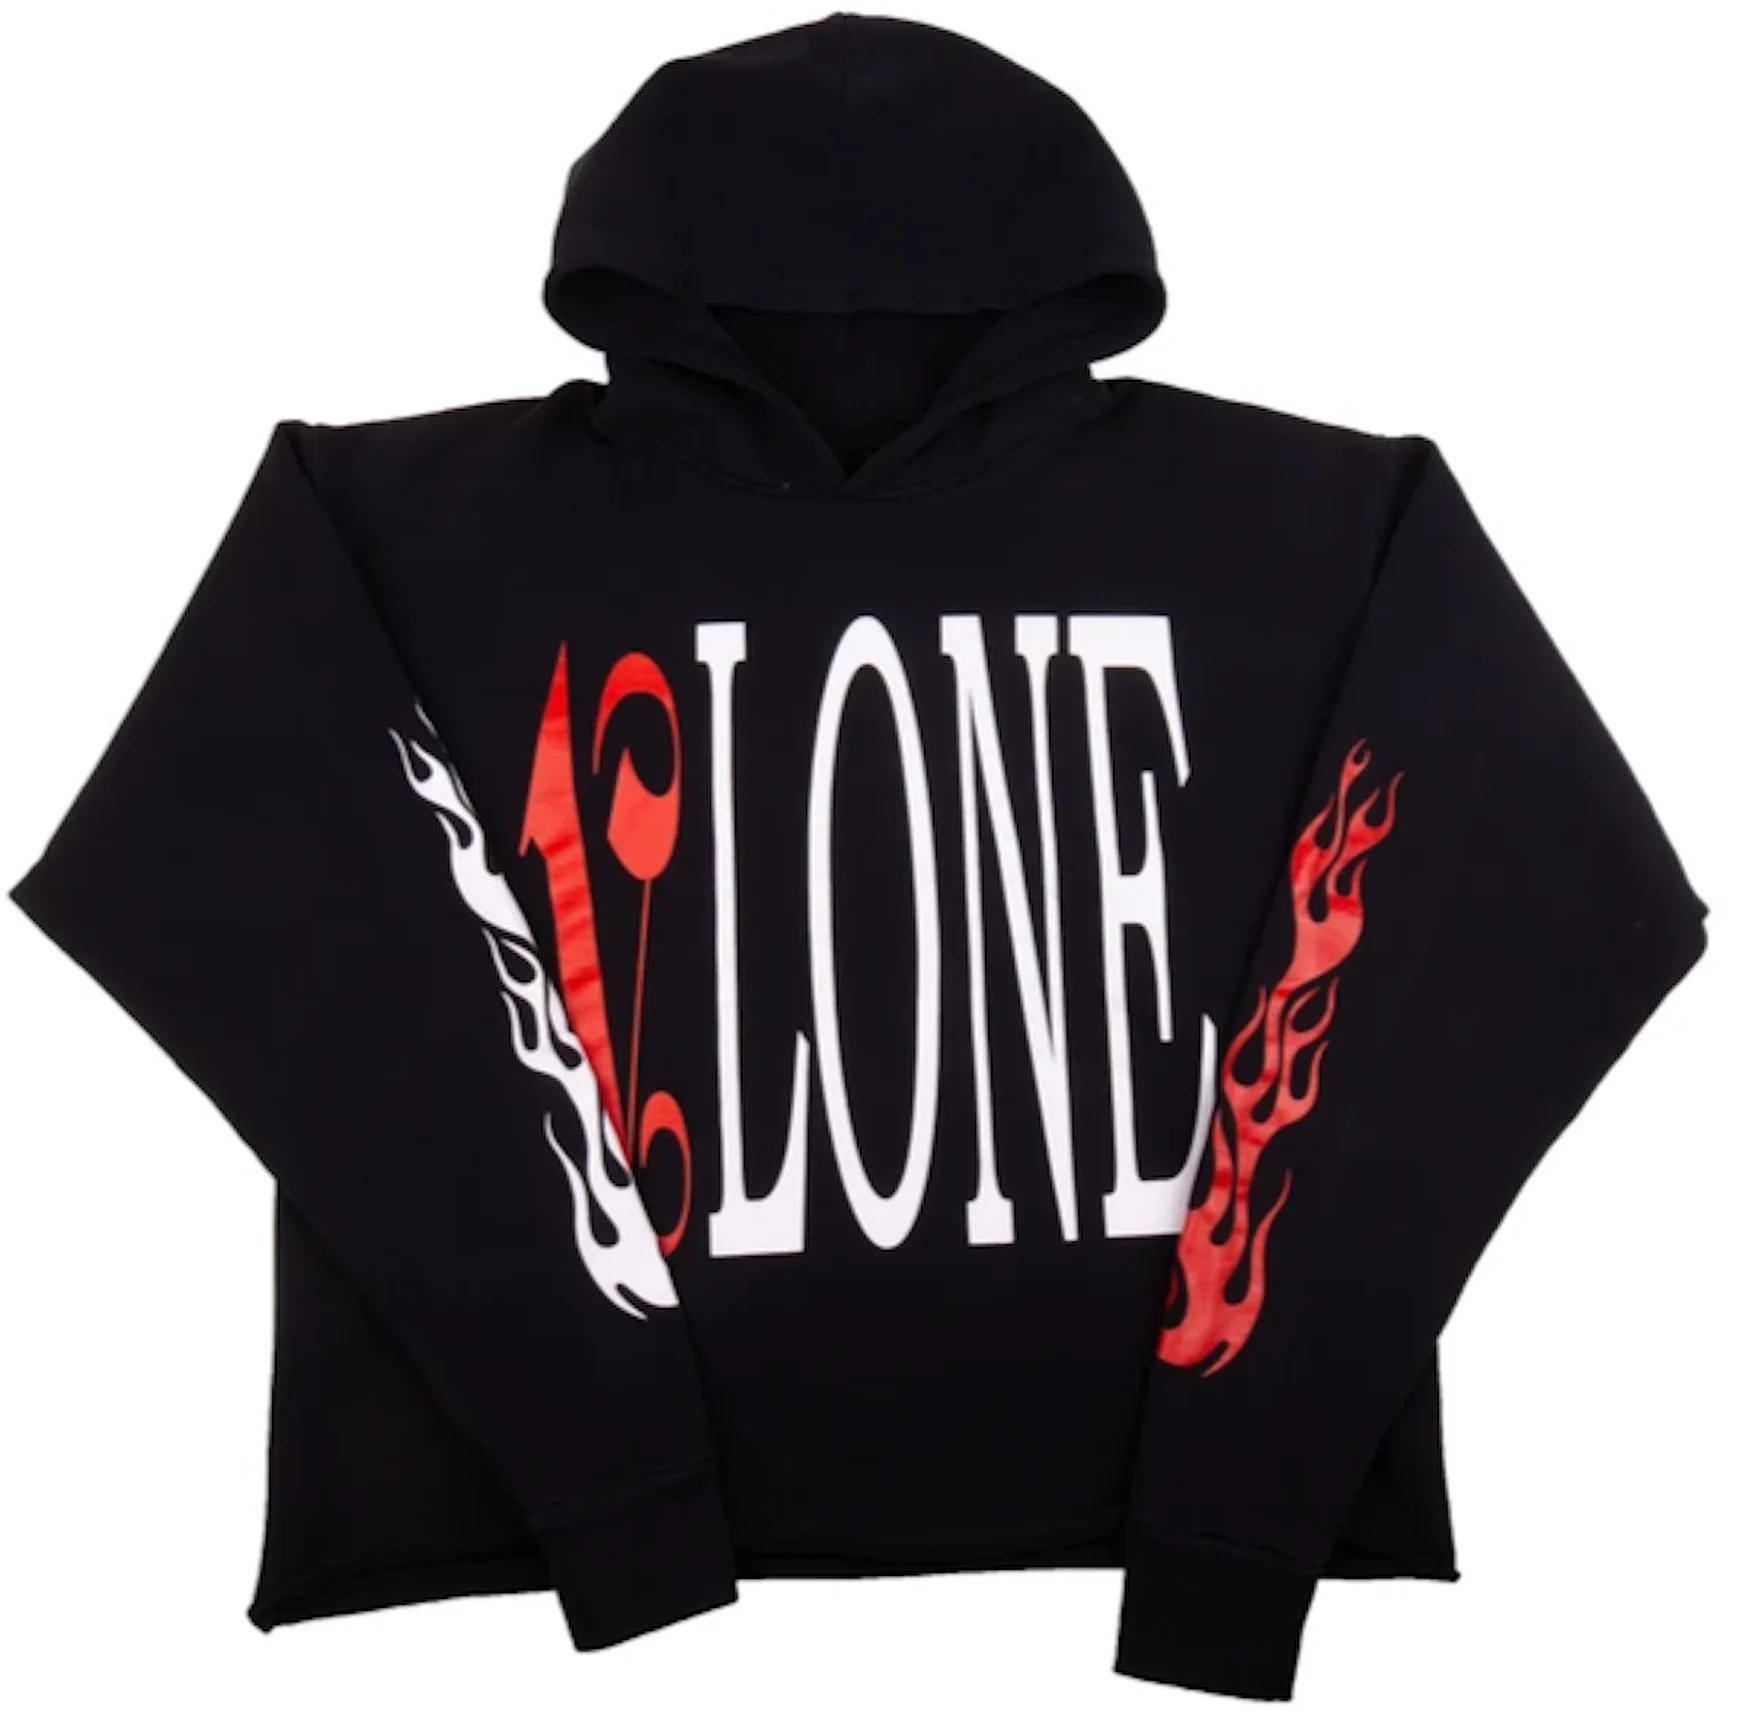 VLONE x PALM ANGELS CROP Hoodie Black/Red SMALL 100% Authentic NEW CHROME  ALONE